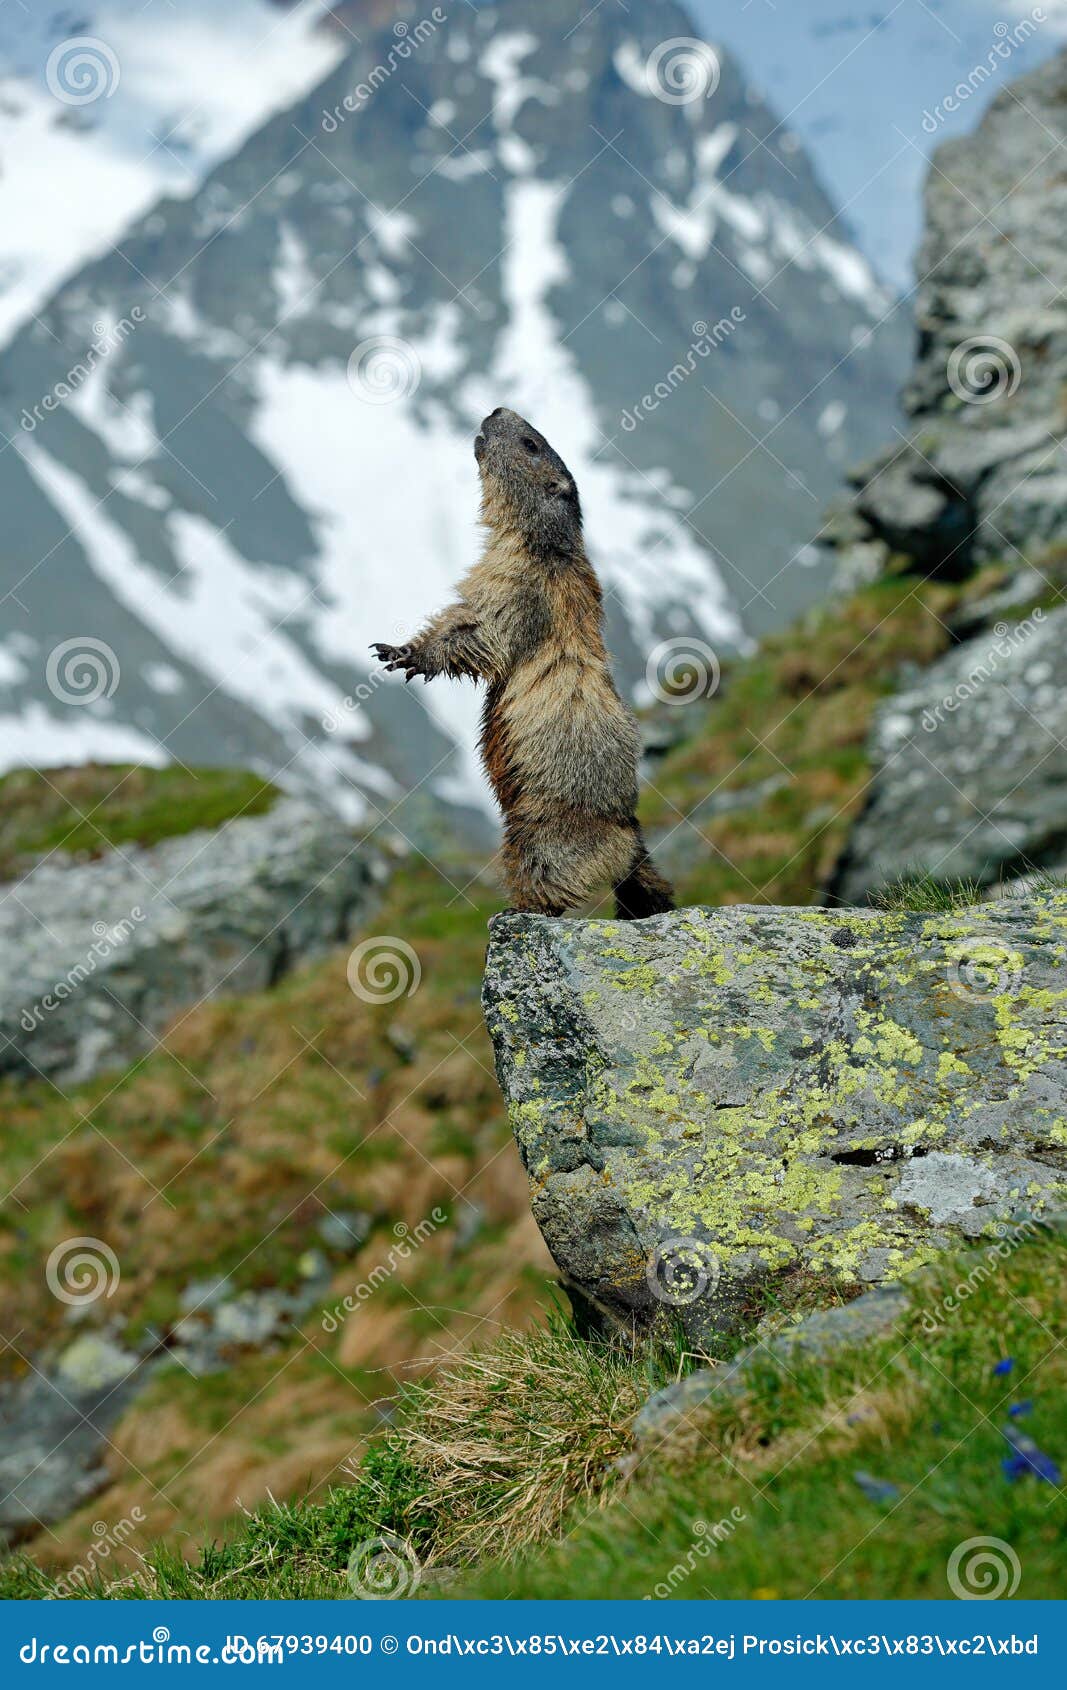 cute sit up on its hind legs animal marmot, marmota marmota, sitting in he grass, in the nature habitat, grossglockner, alp, a